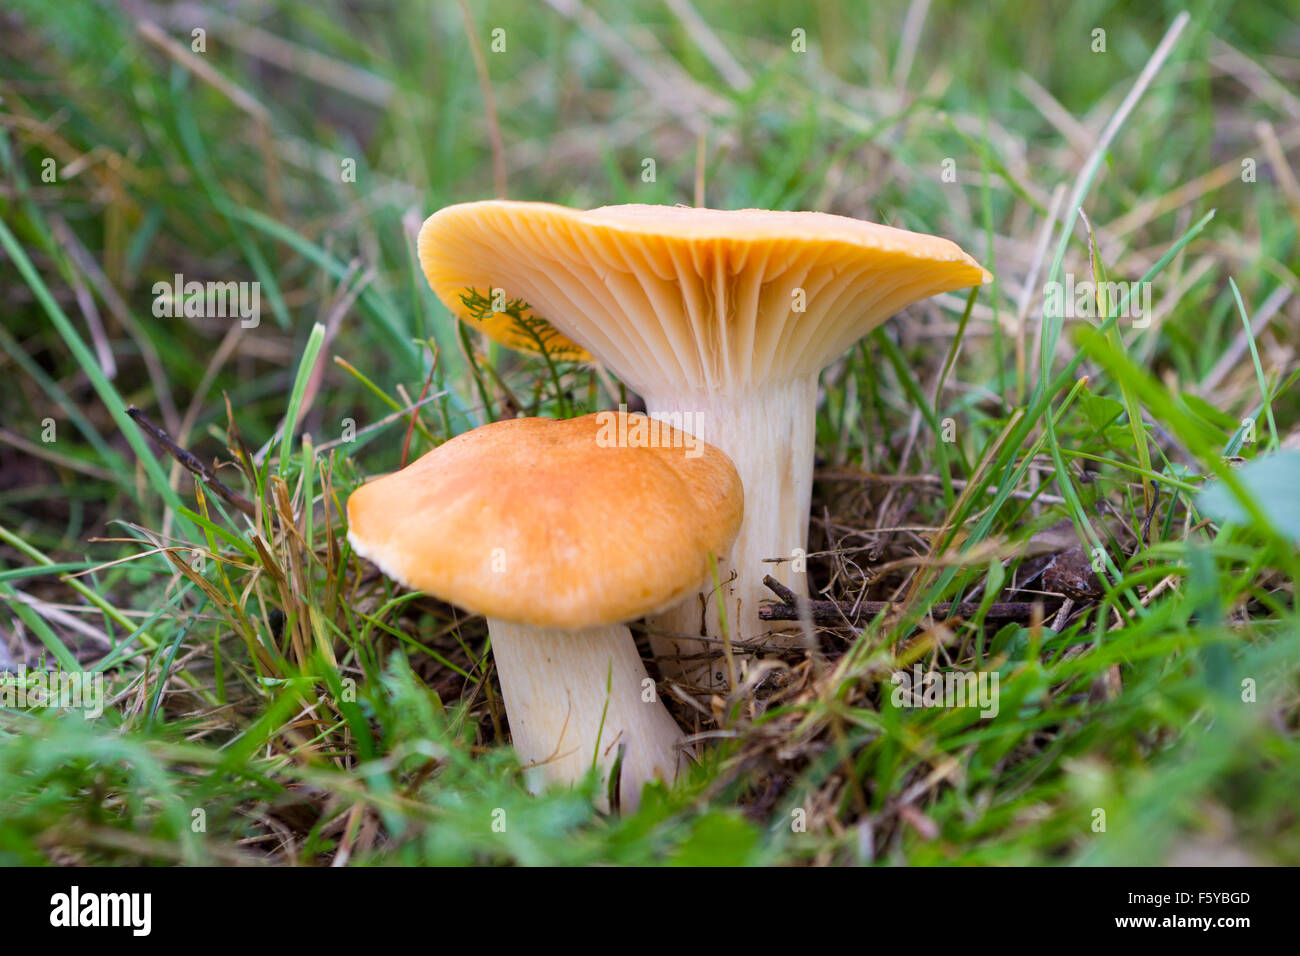 Two wild mushrooms Cuphopyllus pratensis in the grass Stock Photo